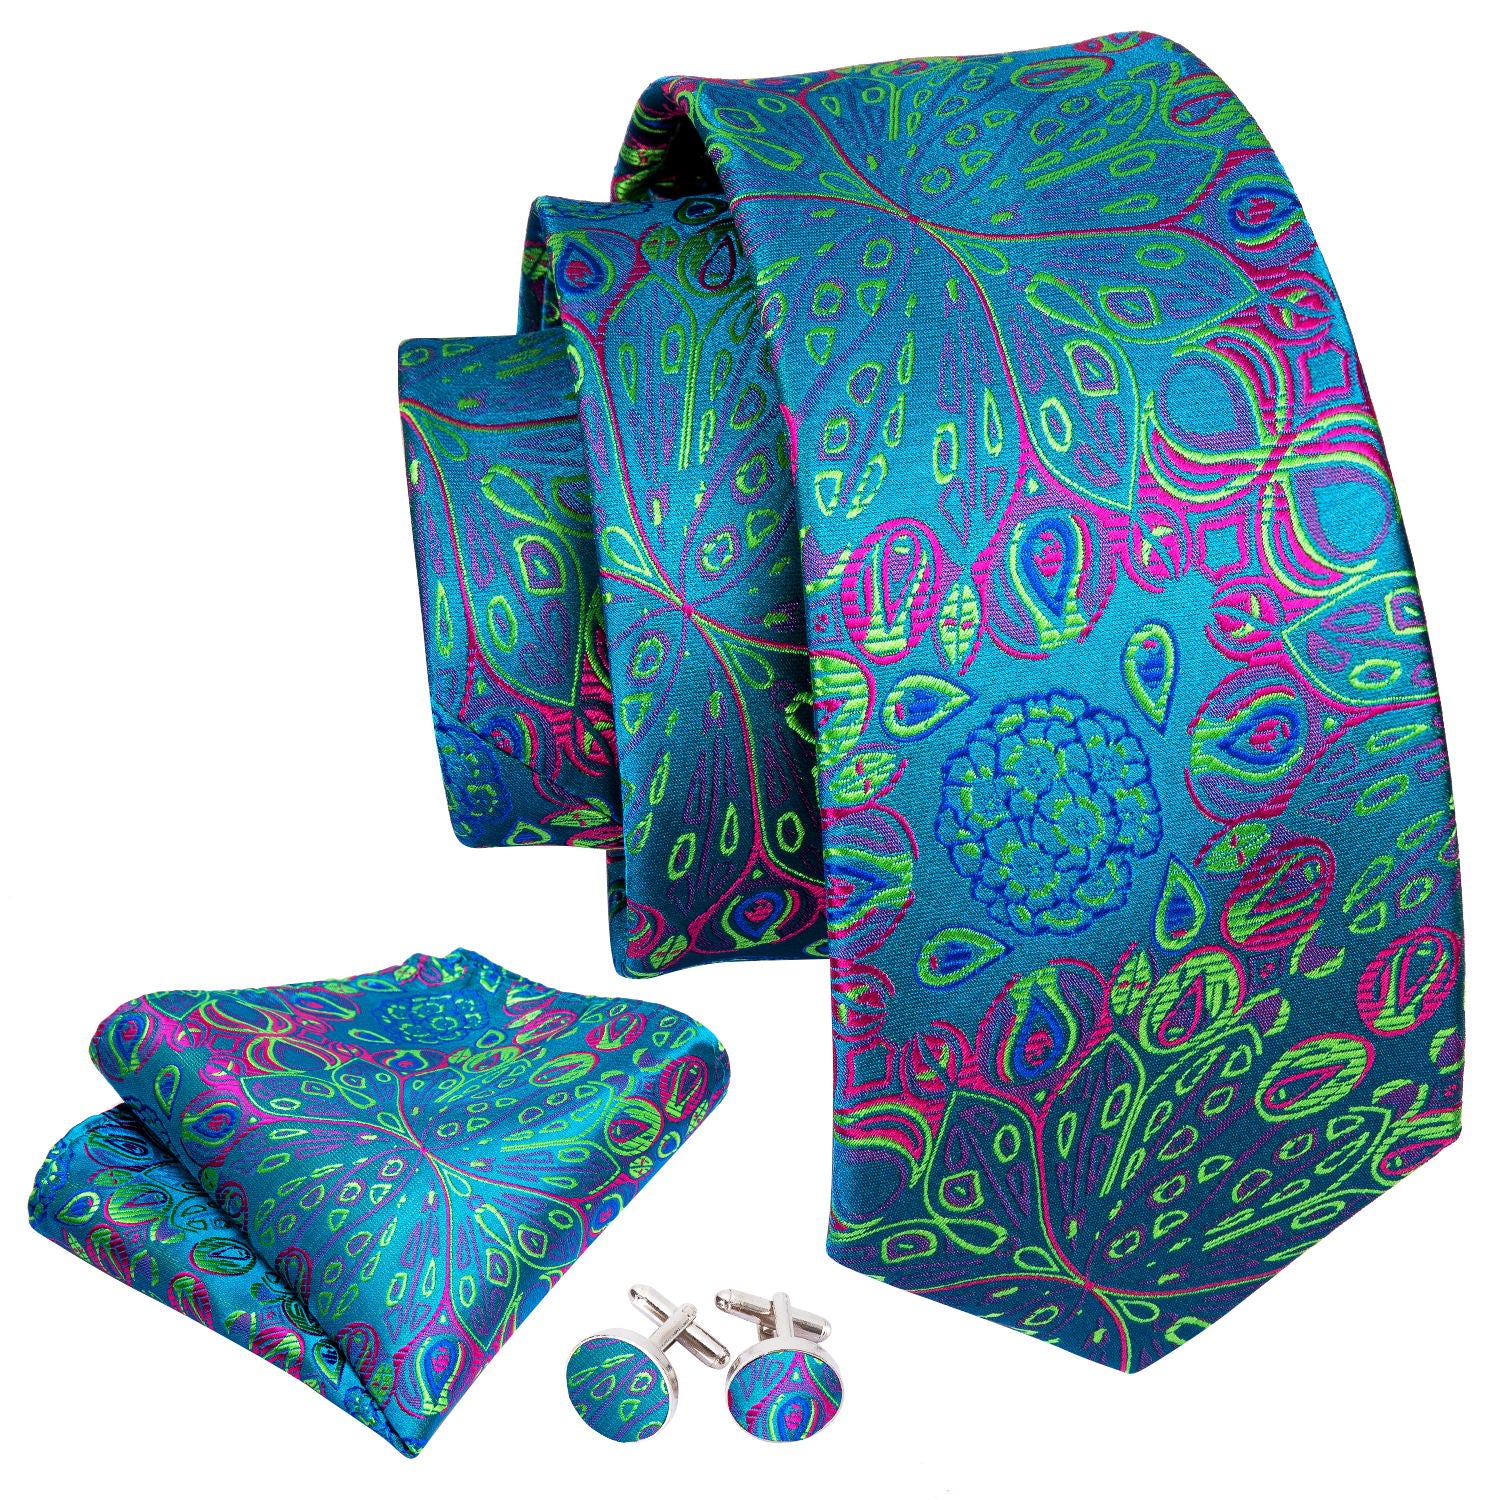 Barry Wang Blue Tie Green Floral Tie Pocket Square Cufflinks Set